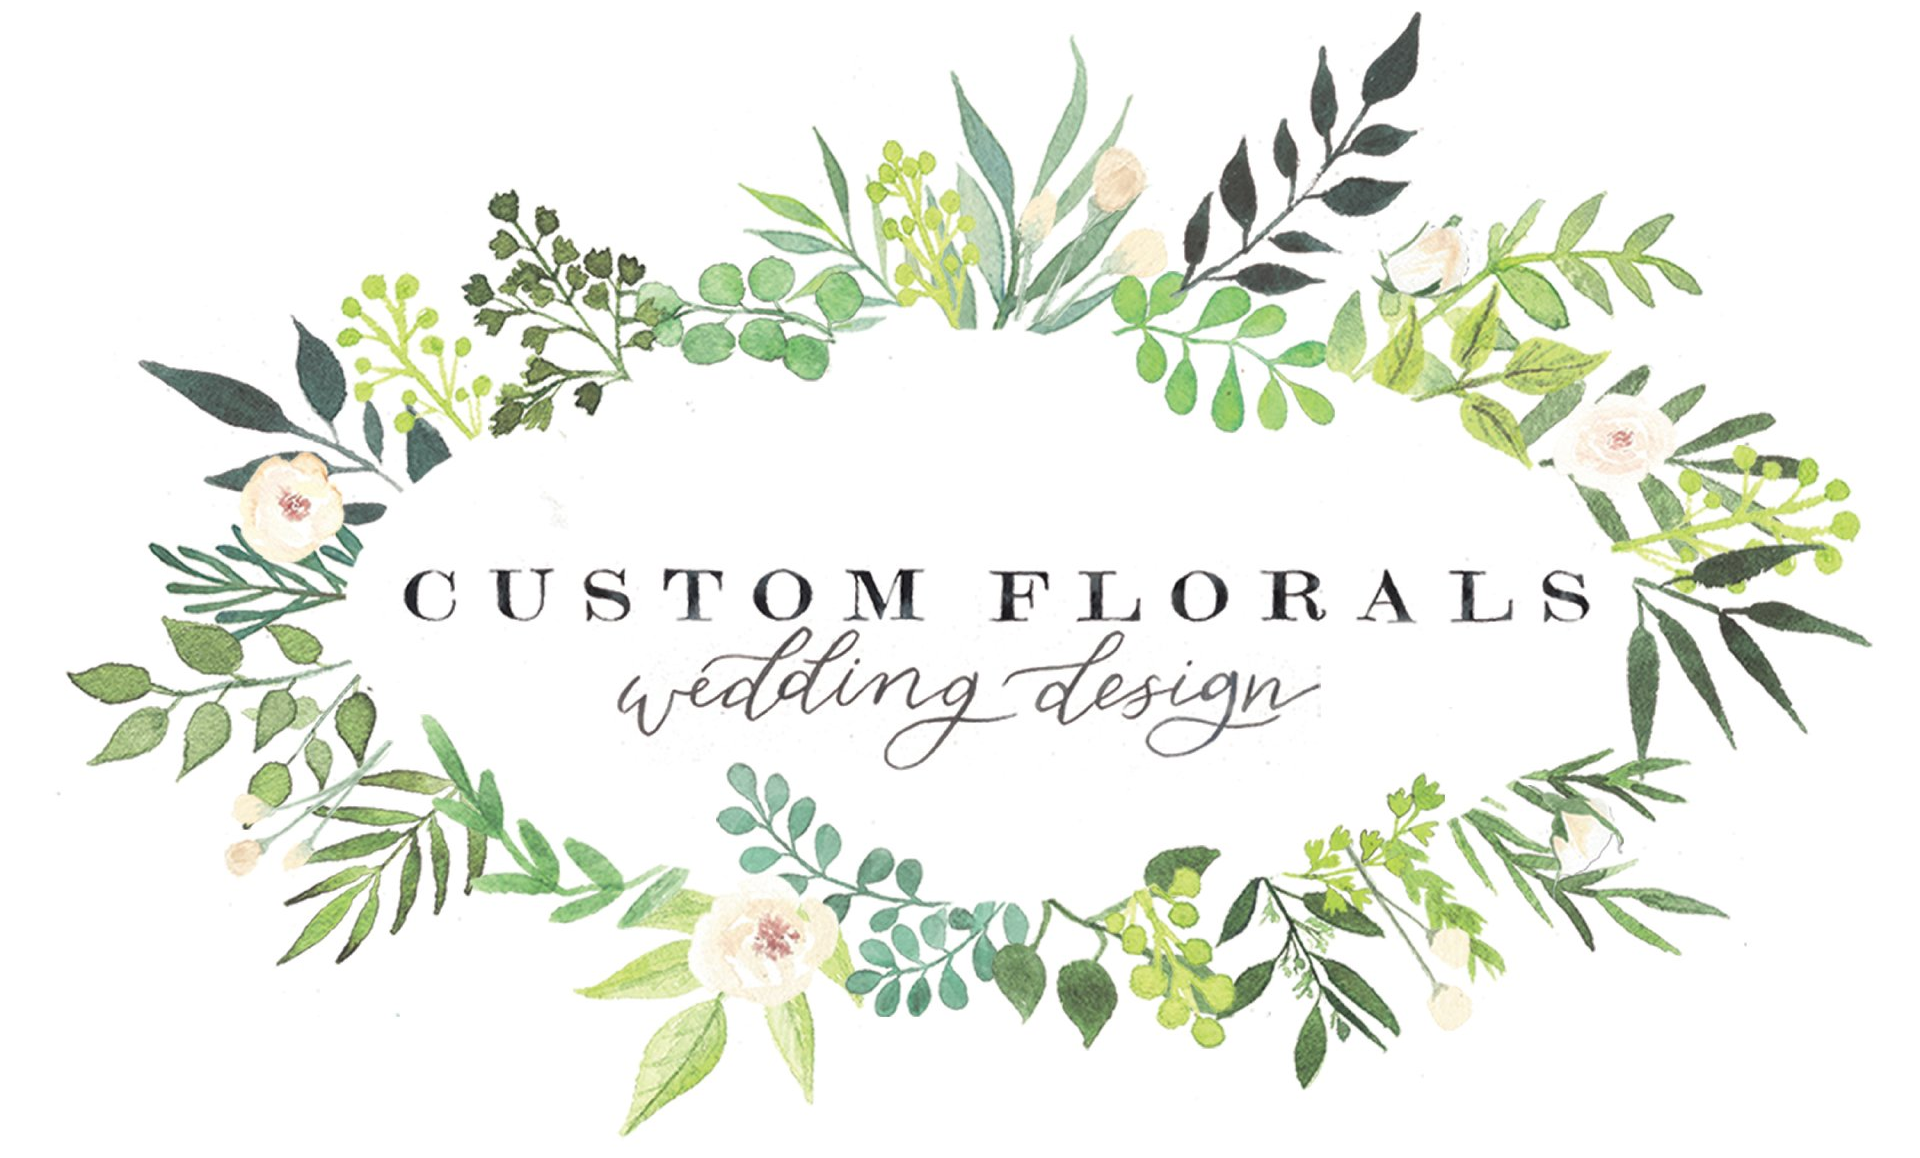 Custom Florals Lancaster, Pa  Wedding Flowers and Design for